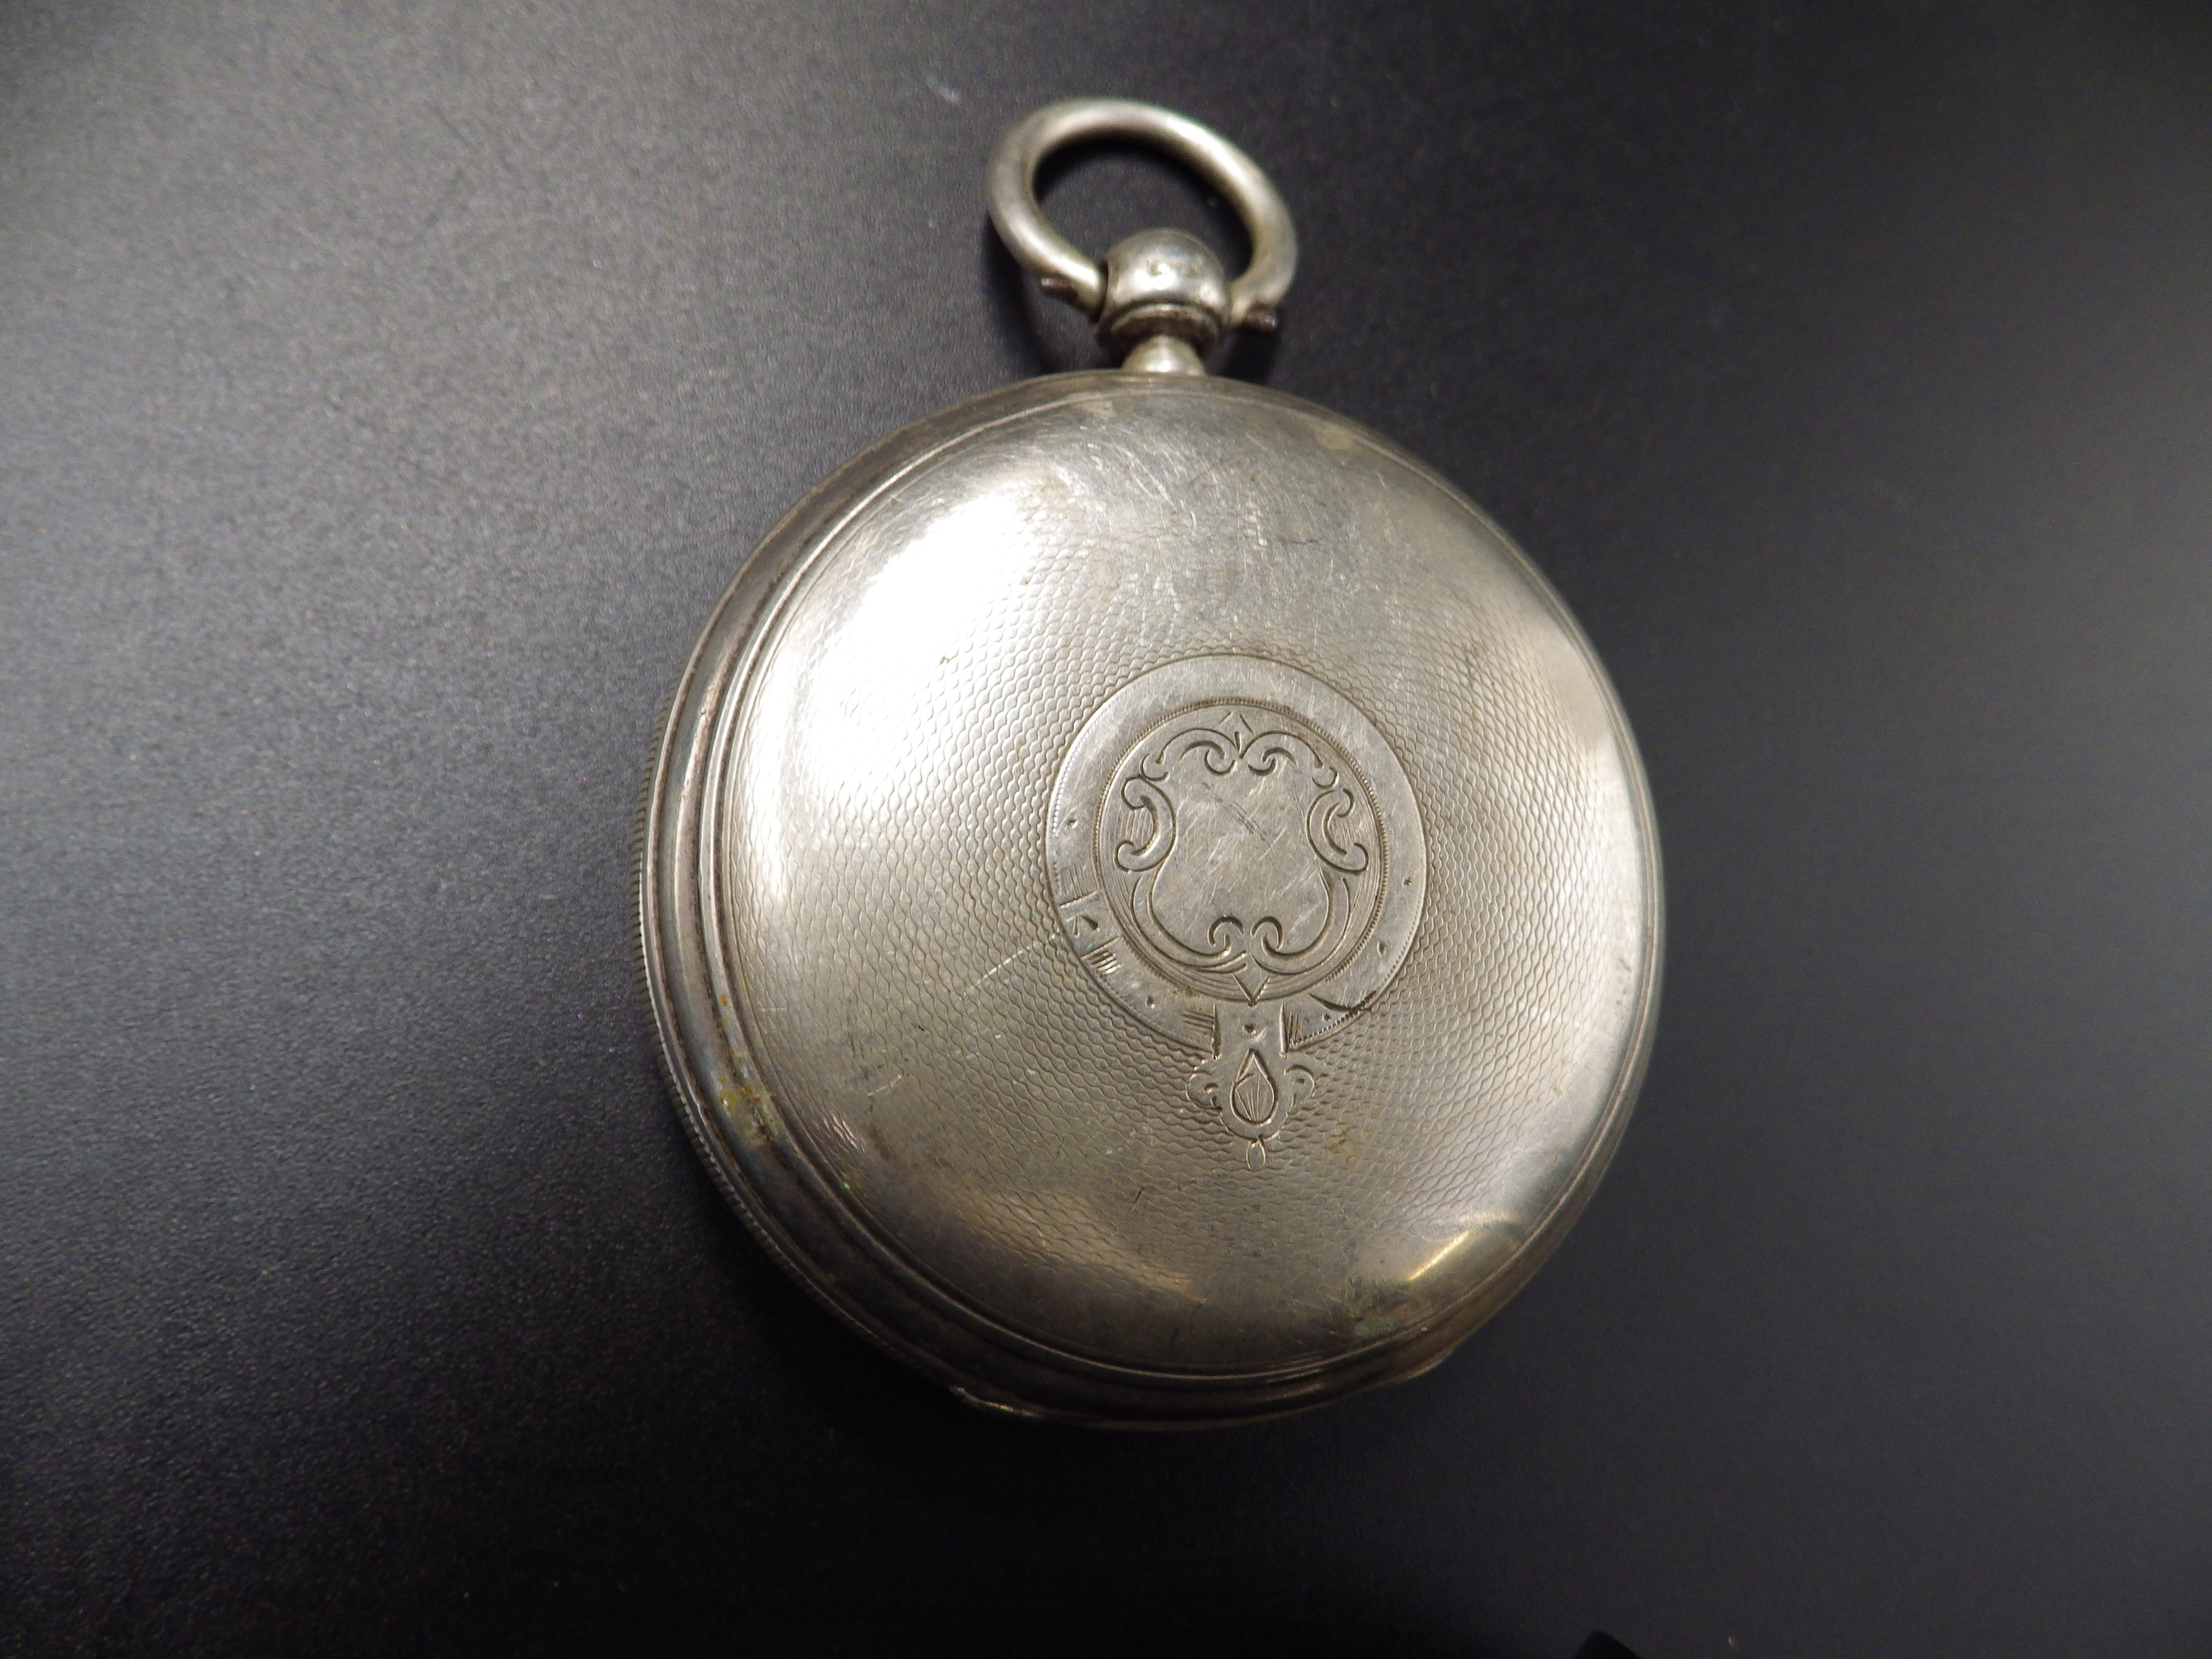 5 pocket watches - 2 are Silver cased both hallmarked Chester 1892 and 1900 hunter pocket watch ( - Image 5 of 6